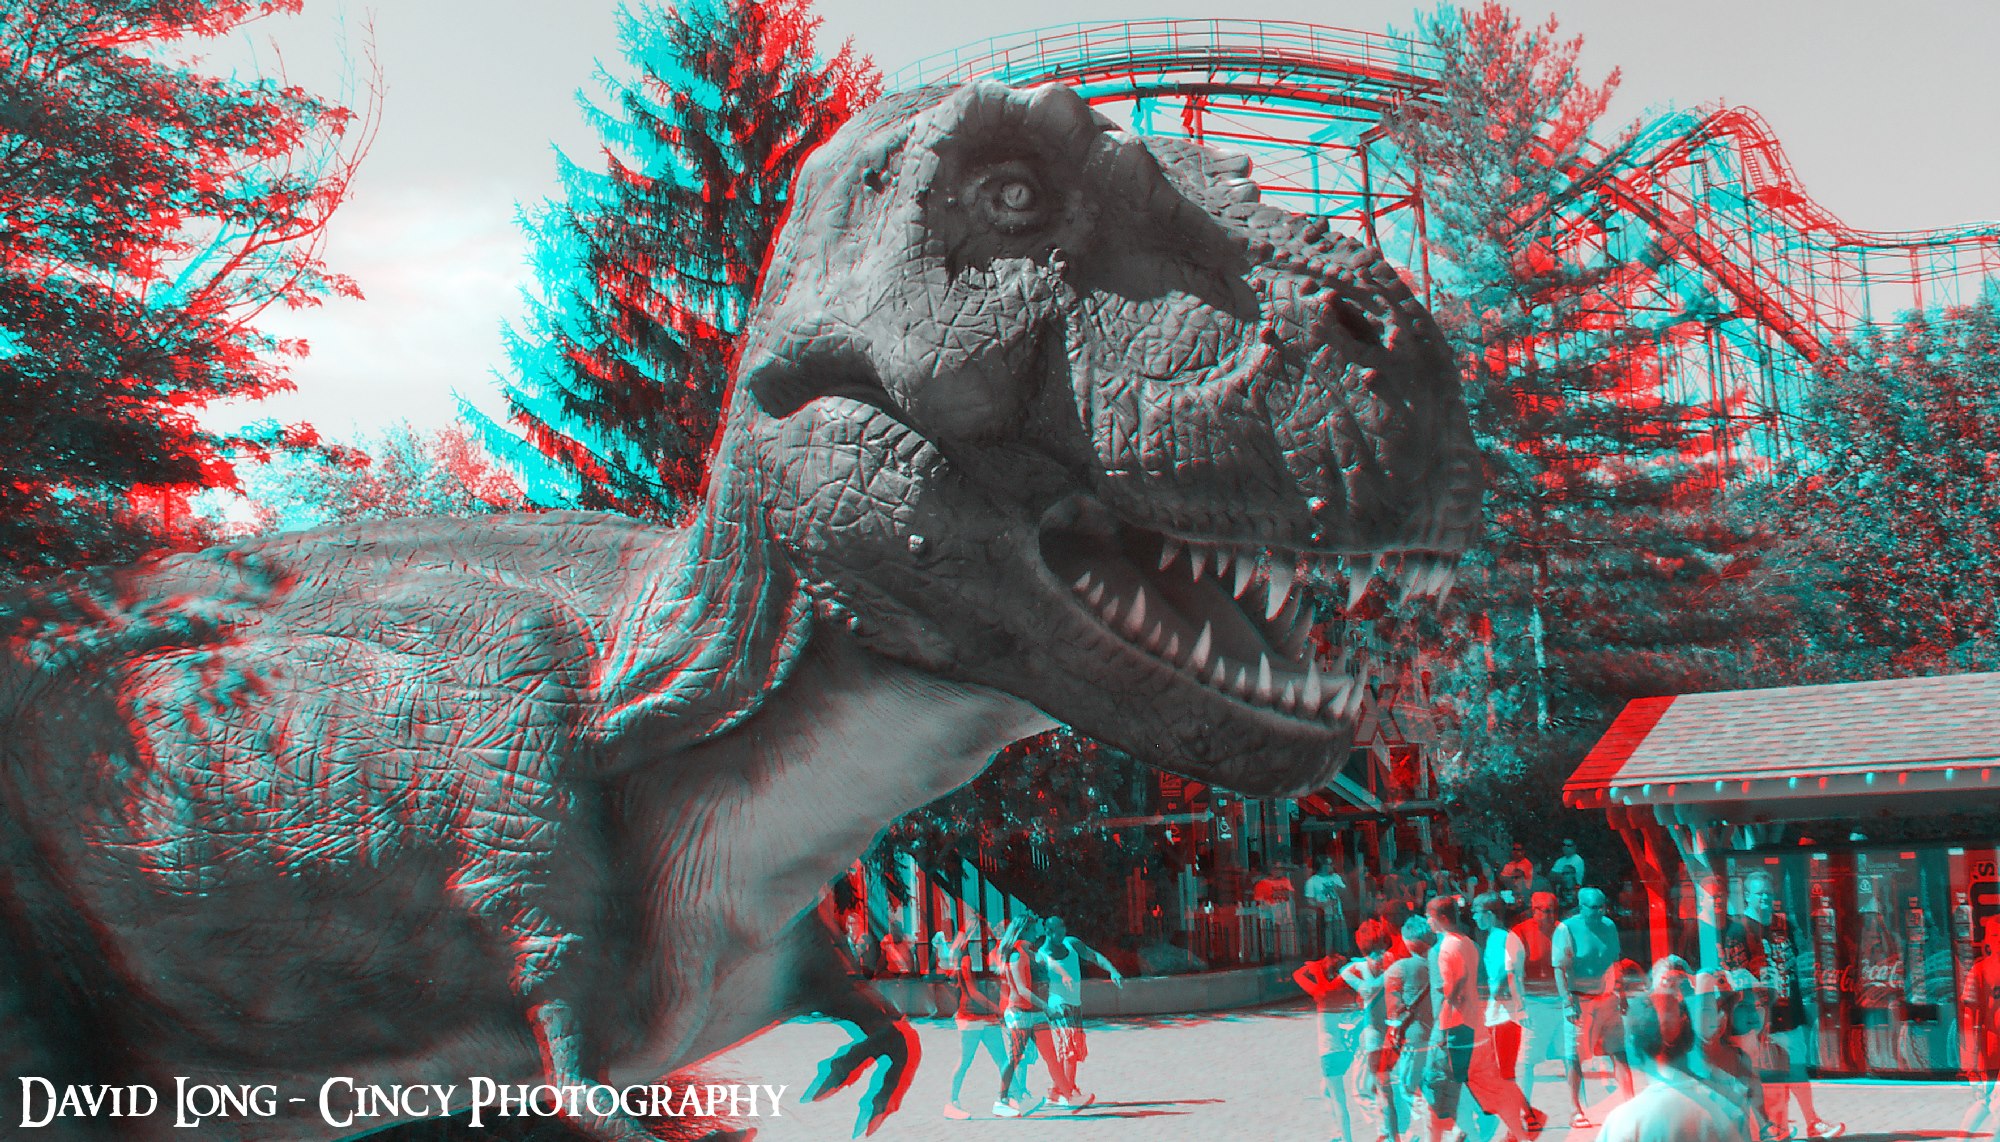 3d Photos Anaglyph Stereoscopic Image By Cincy Photography